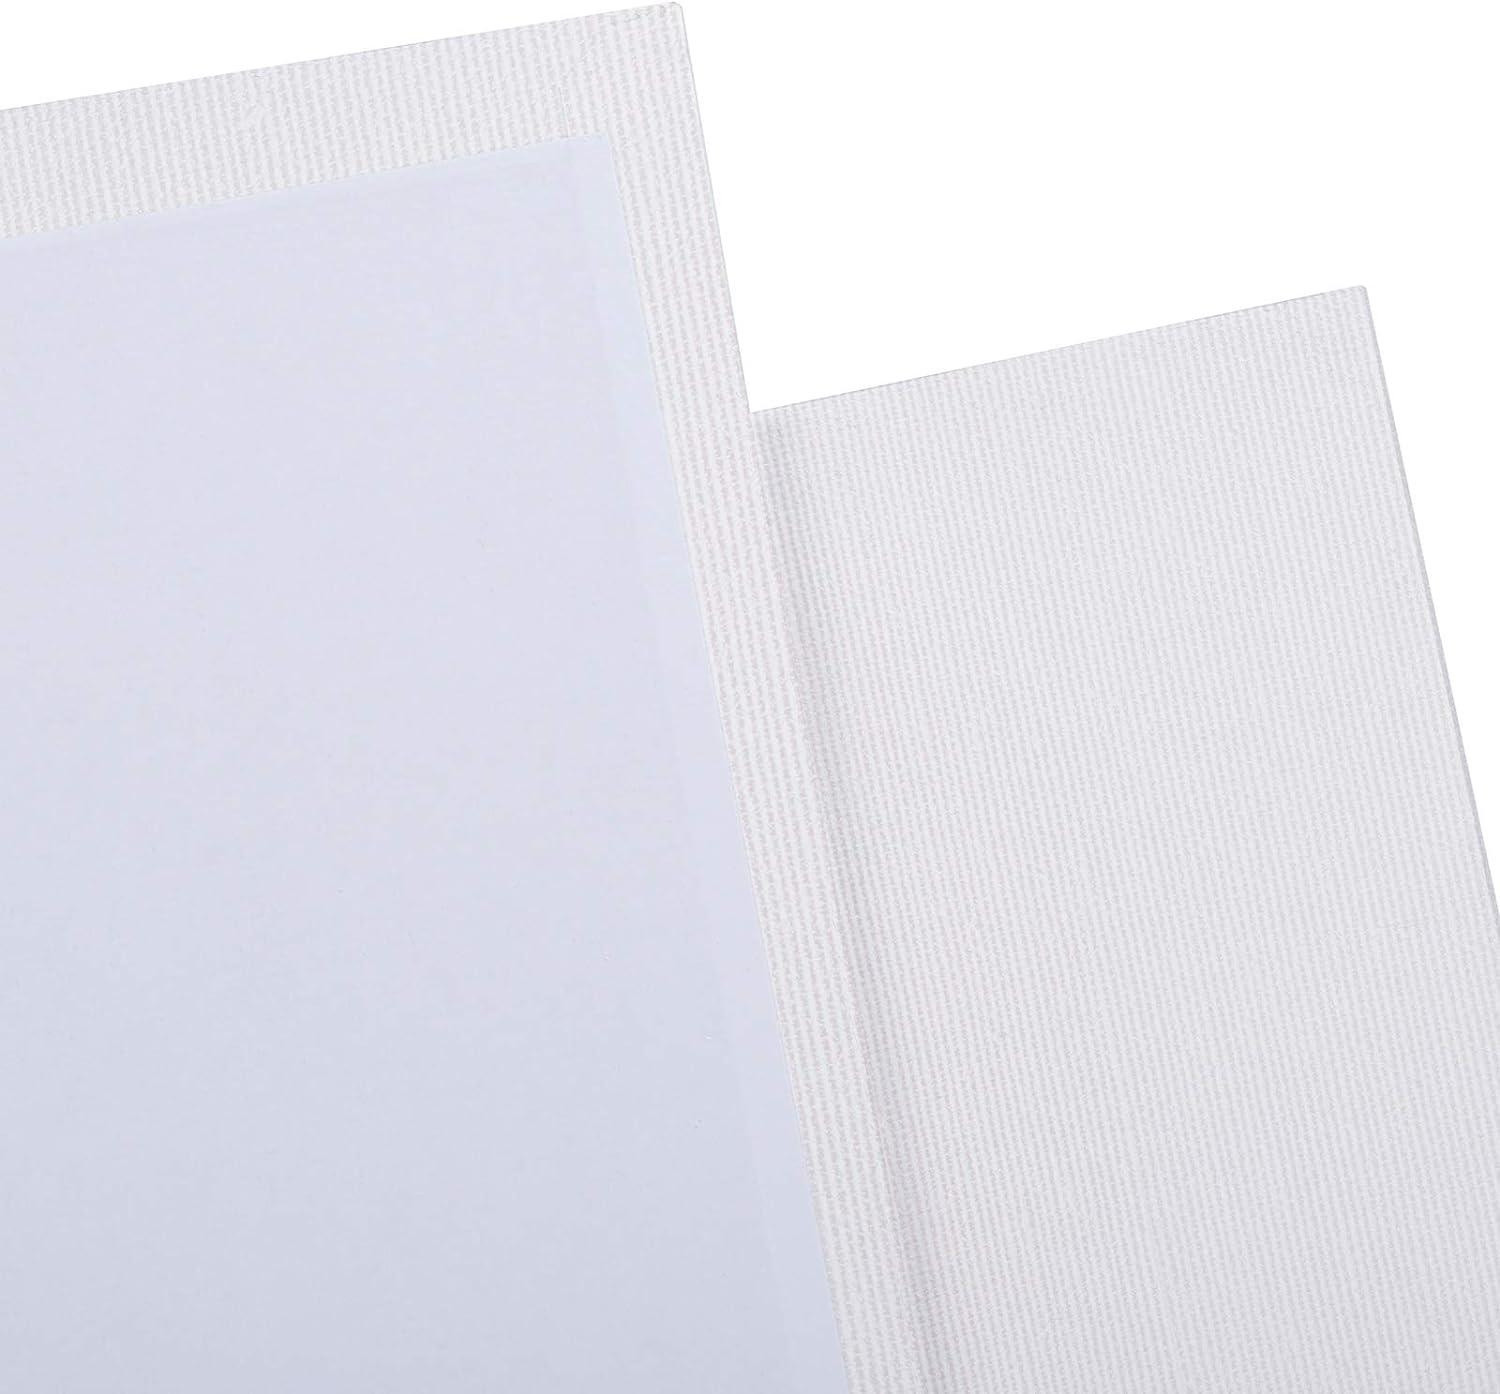 Painting Canvas Panels Multi pack of 7, 100% Cotton Artist Canvas Boards  for Painting Multi Size Primed White Canvas for Acrylic - AliExpress